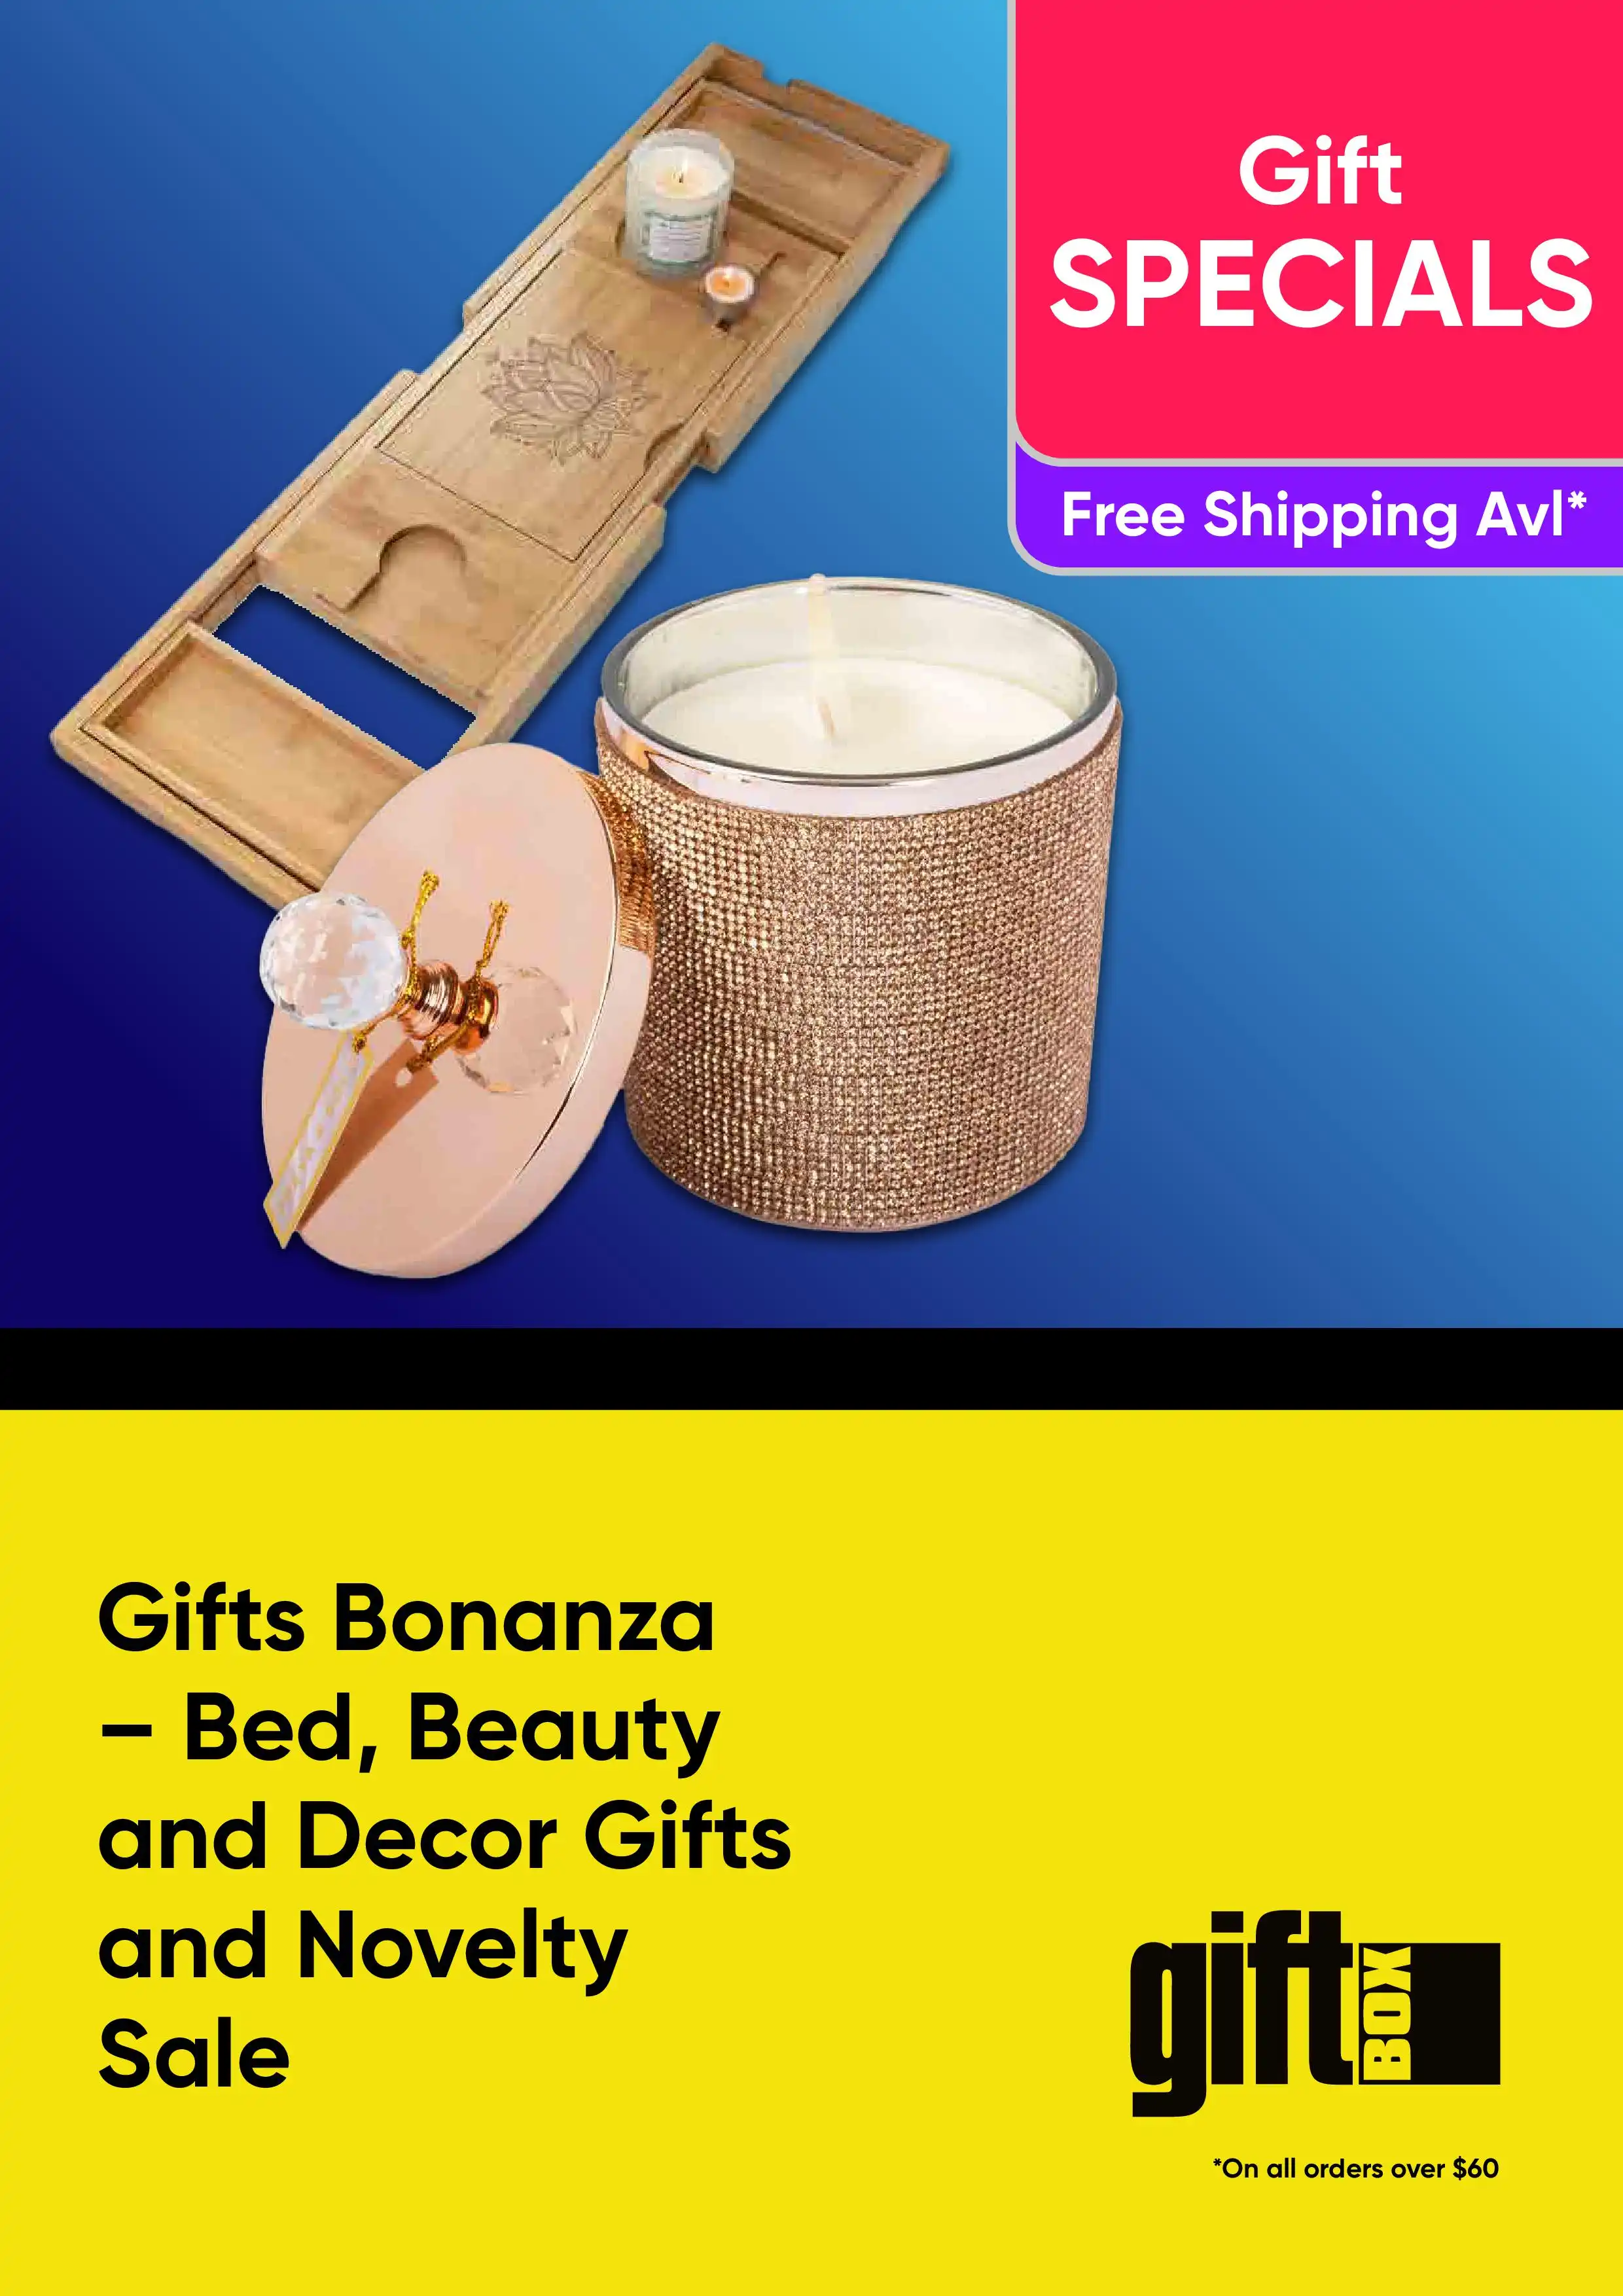 Gifts Bonanza - Bed, Beauty and Decor Gifts and Novelty Sale